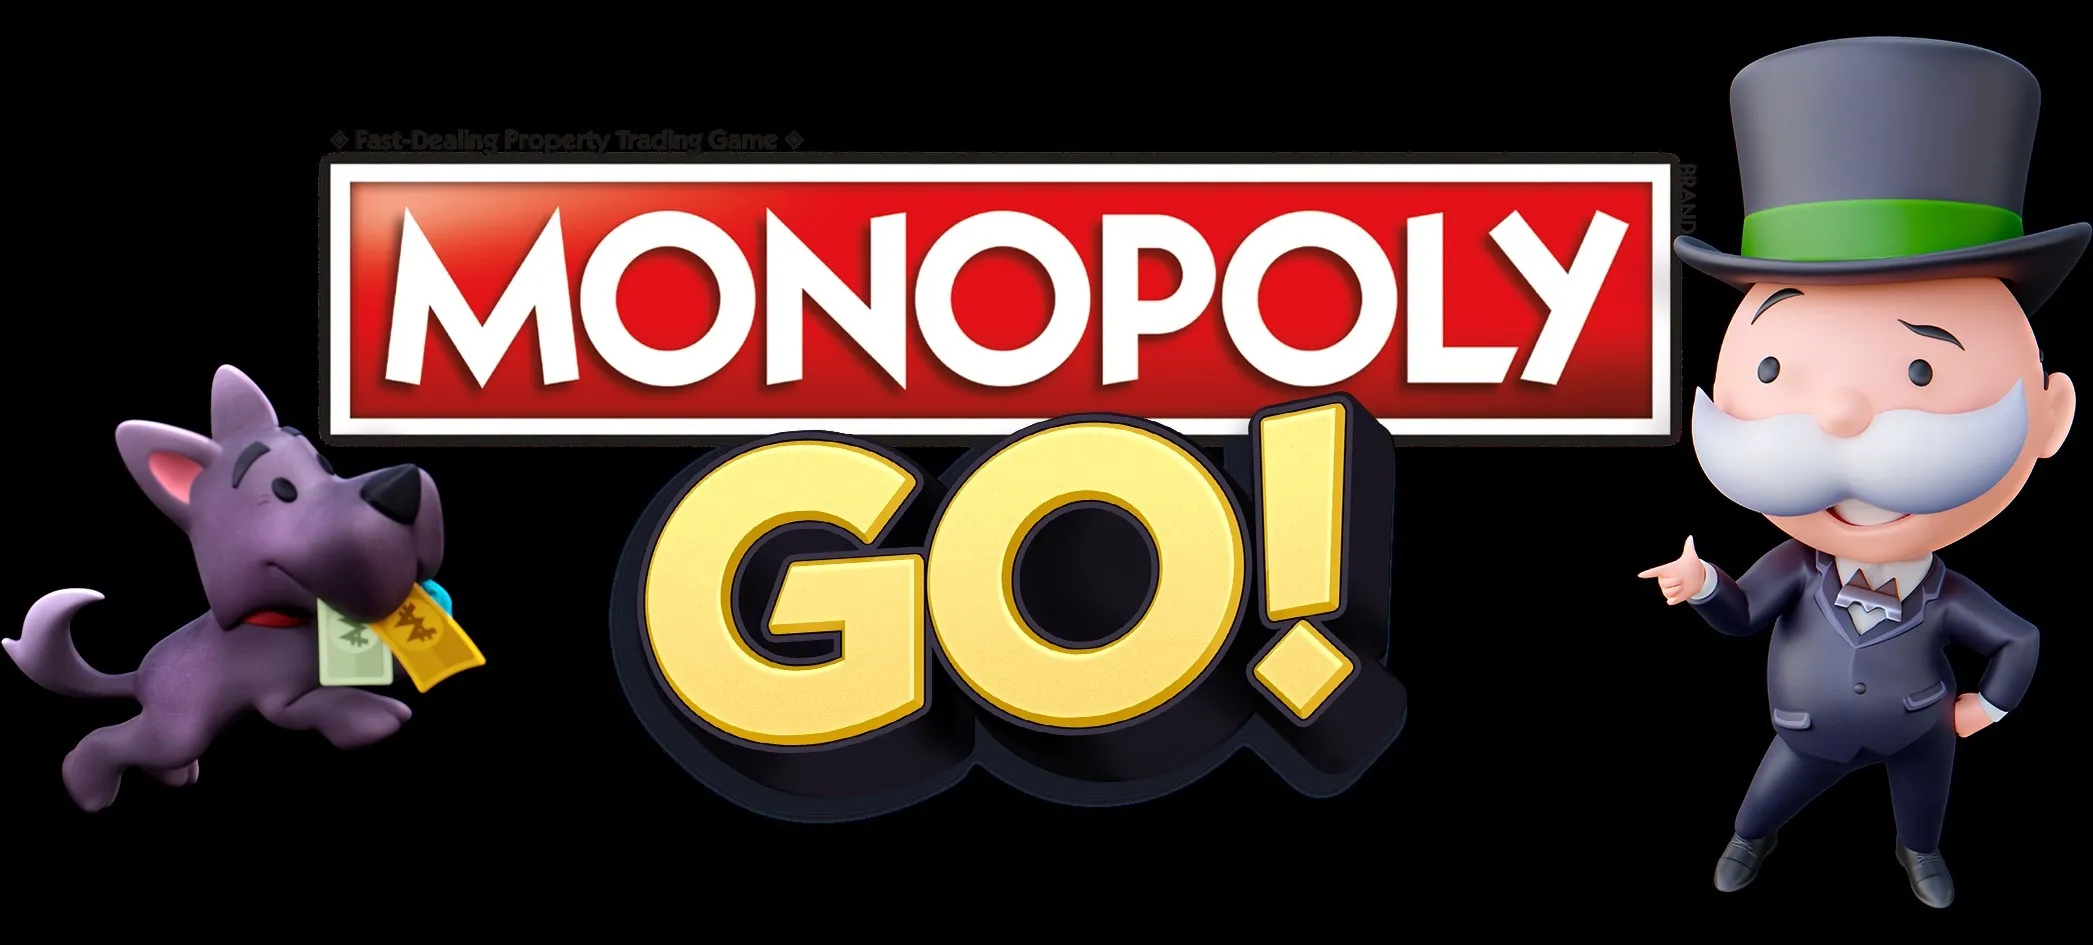 Shocked at the amount of money Scopely spent to advertise the game Monopoly Go